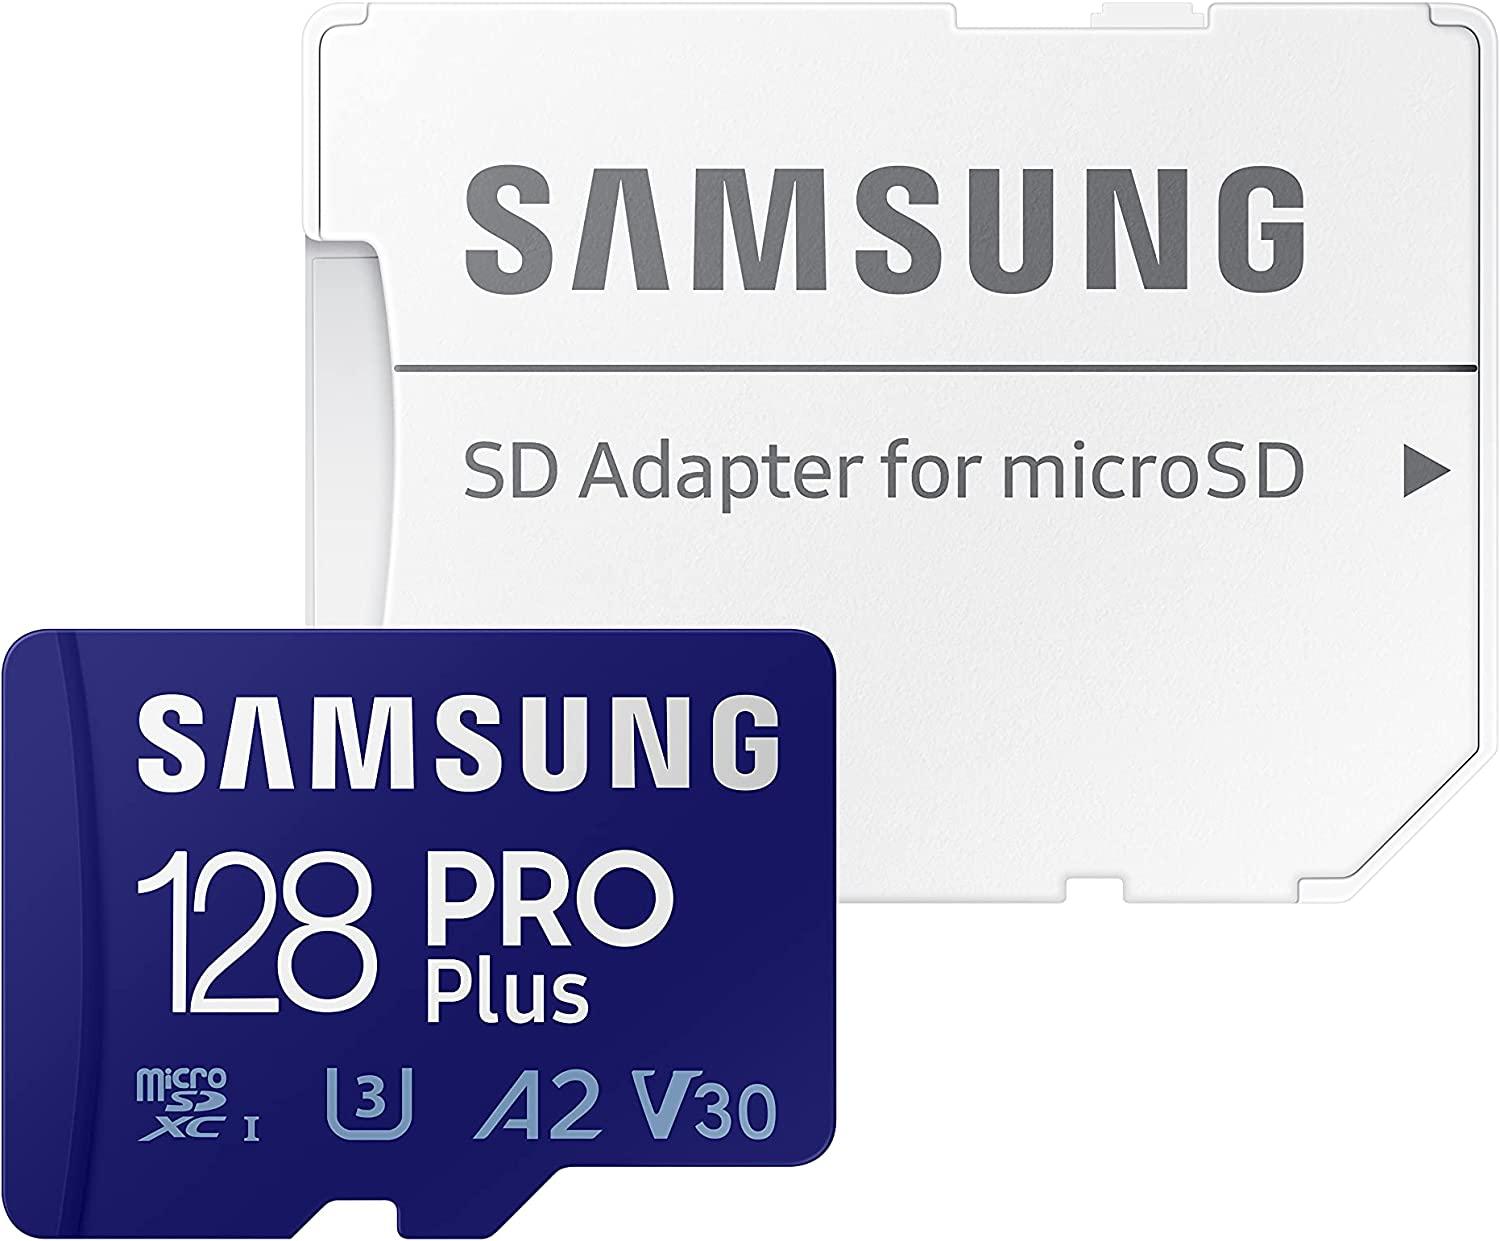 128GB Samsung Pro Plus microSDXC Memory Card with Adapter for $12.99